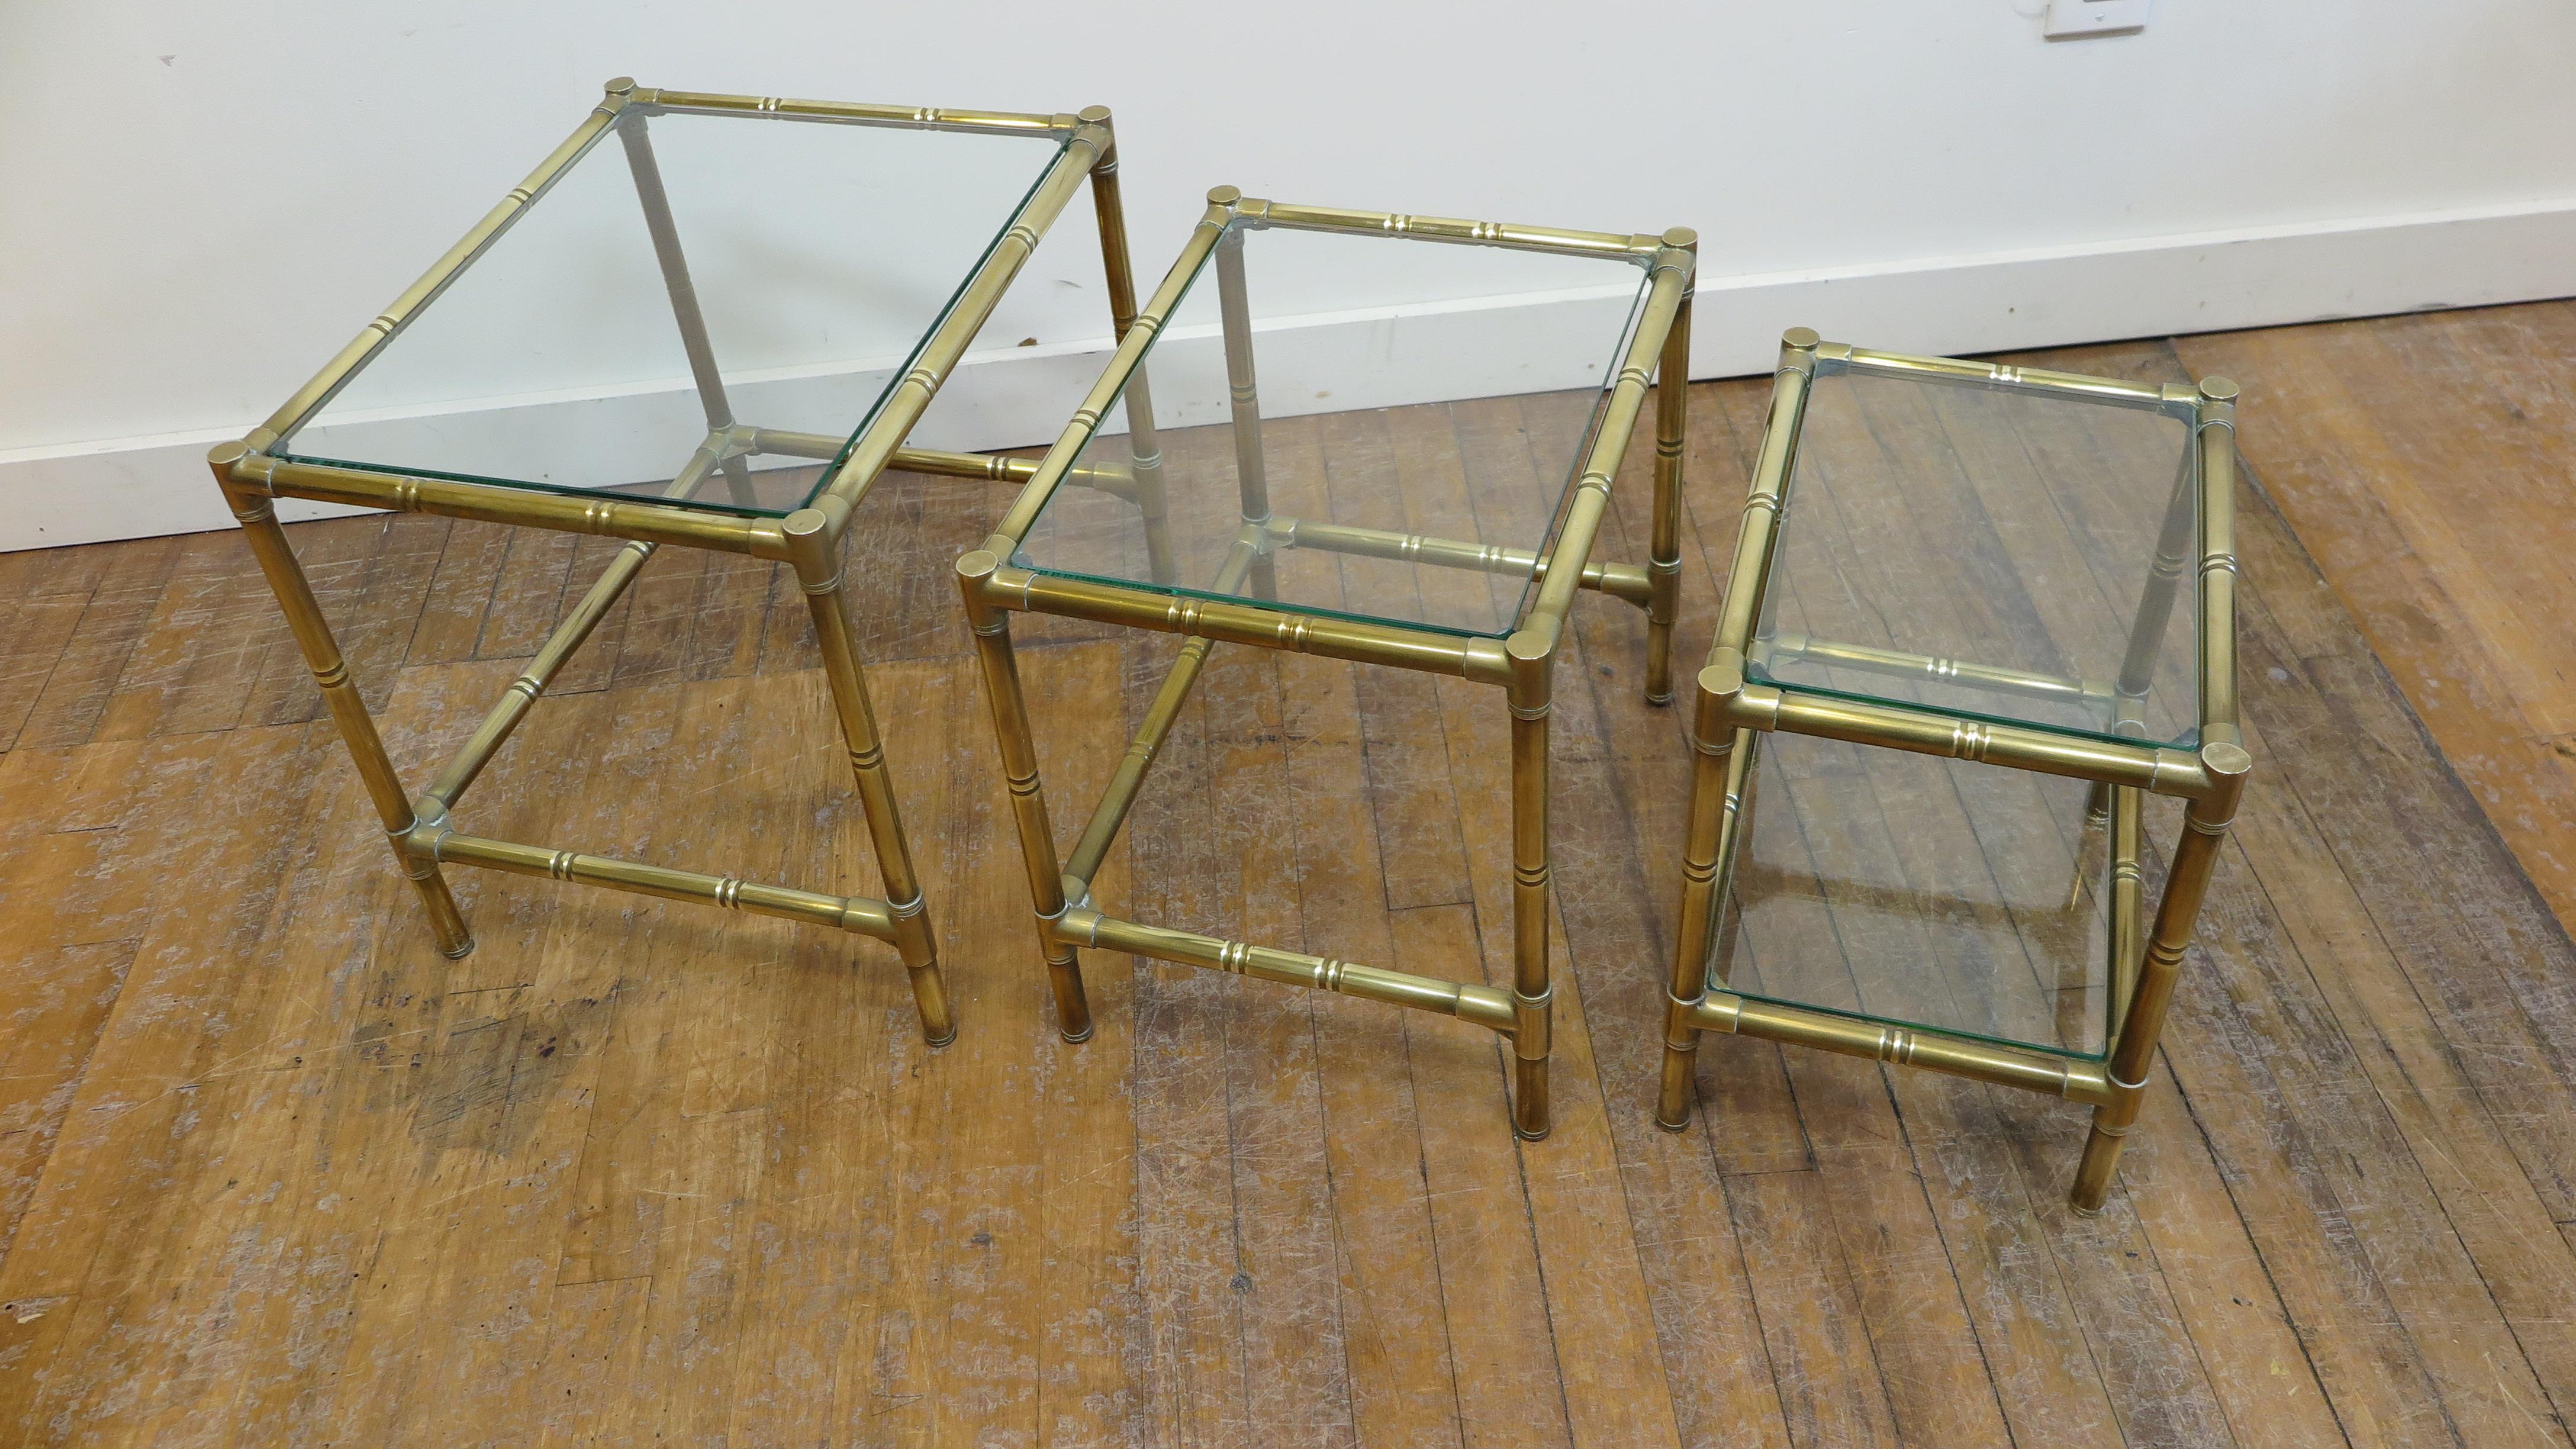 French midcentury brass and glass set of 3 nesting tables. Modernist brass faux bamboo styled nesting tables. Tables are high quality brass construction with brass joining's. Very good condition. Patina to the brass, all the glass tops are new. The